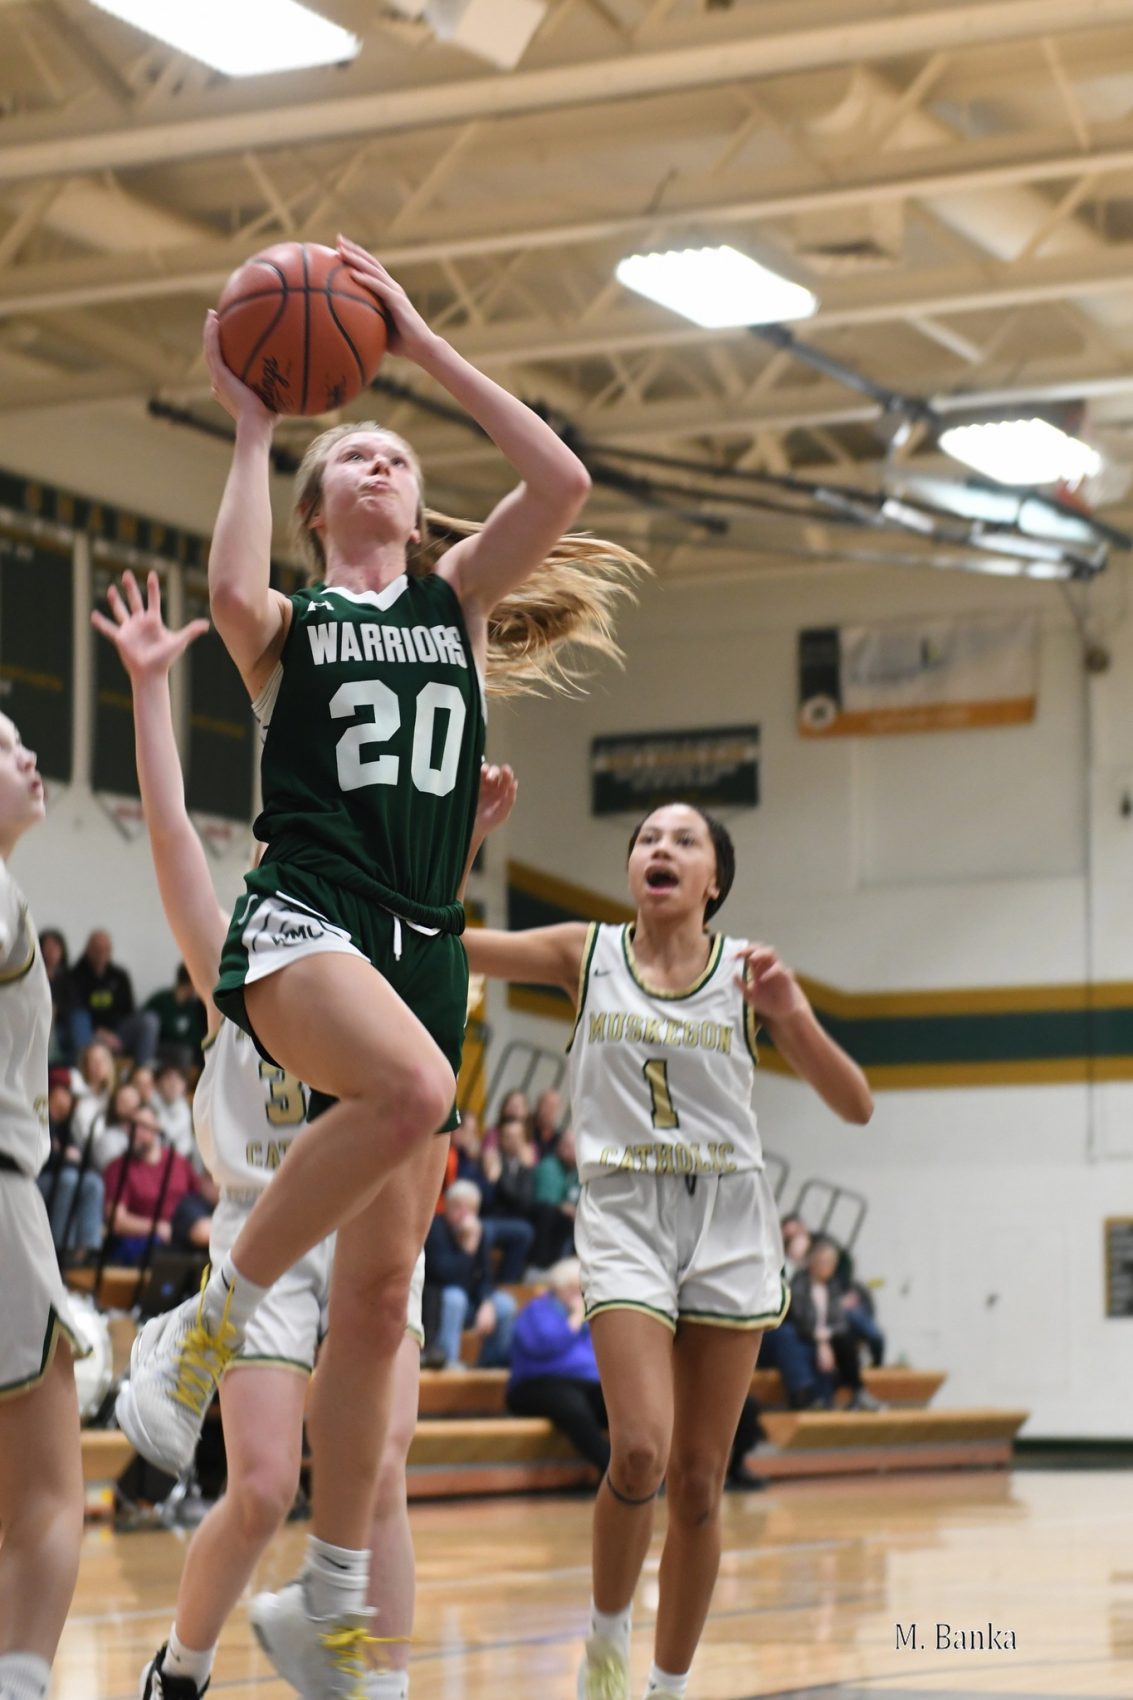 Folkema’s strong outing leads Western Michigan Christian girls to victory over rival Muskegon Catholic